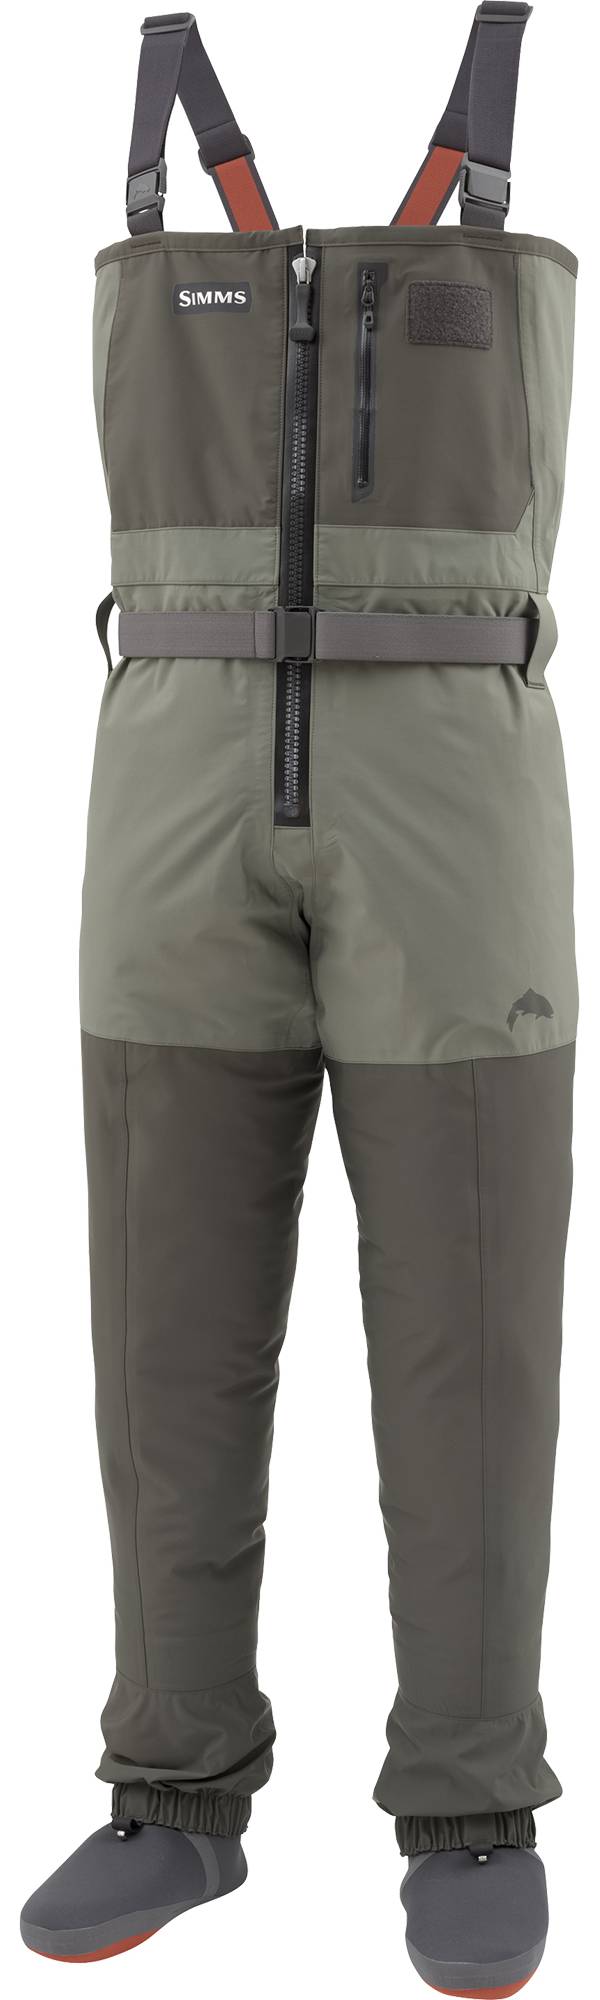 Simms Freestone Z Chest Waders